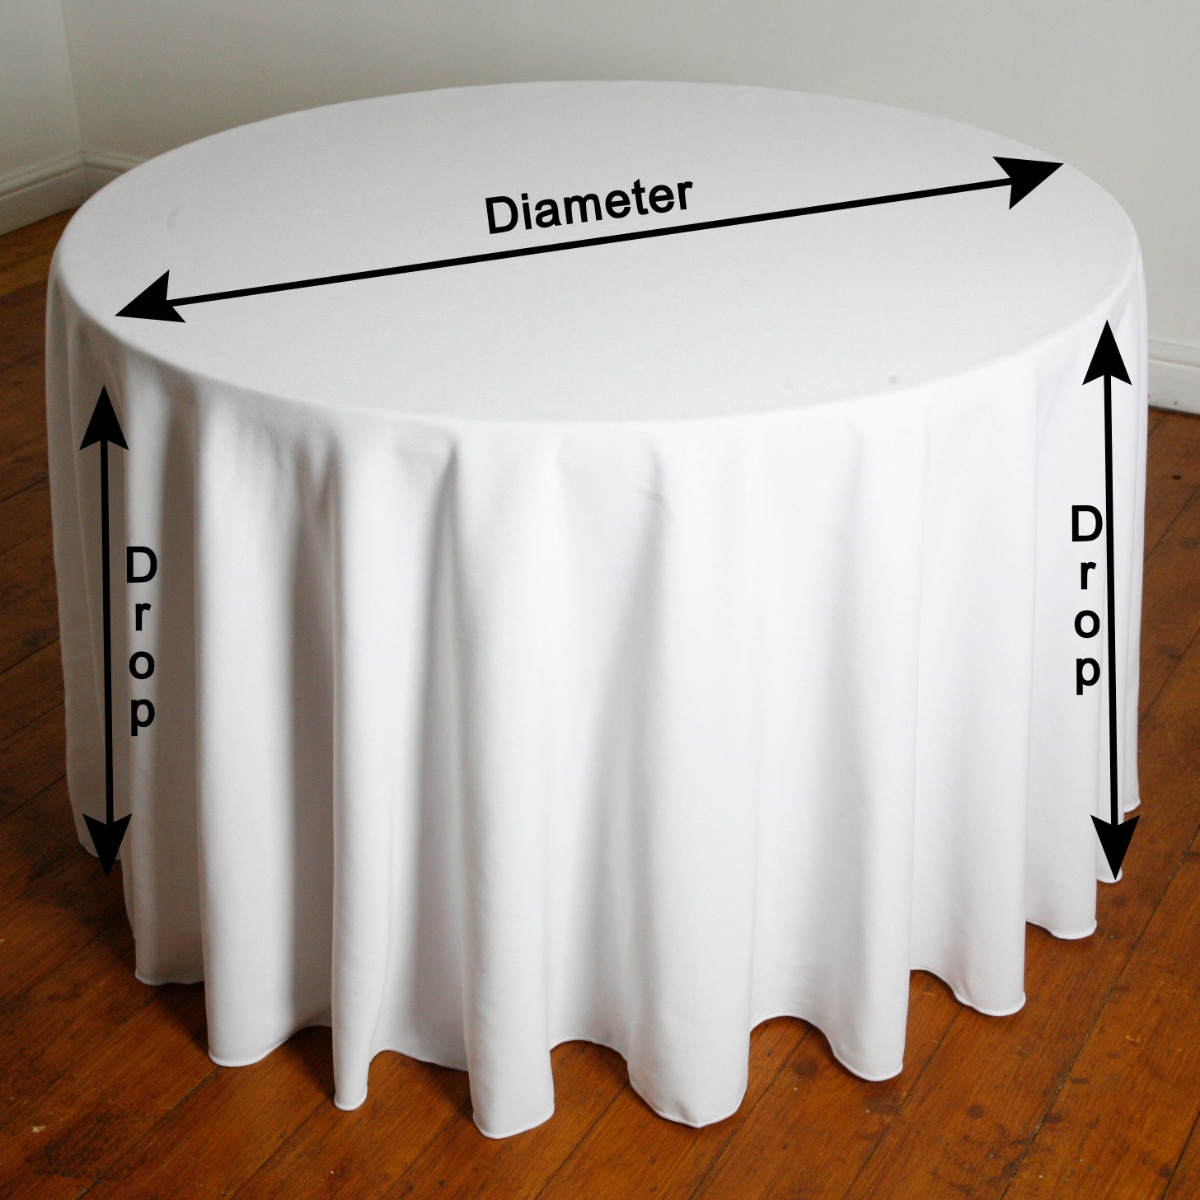 Tablecloth Sizes Calculator: Find Your Perfect Fit!